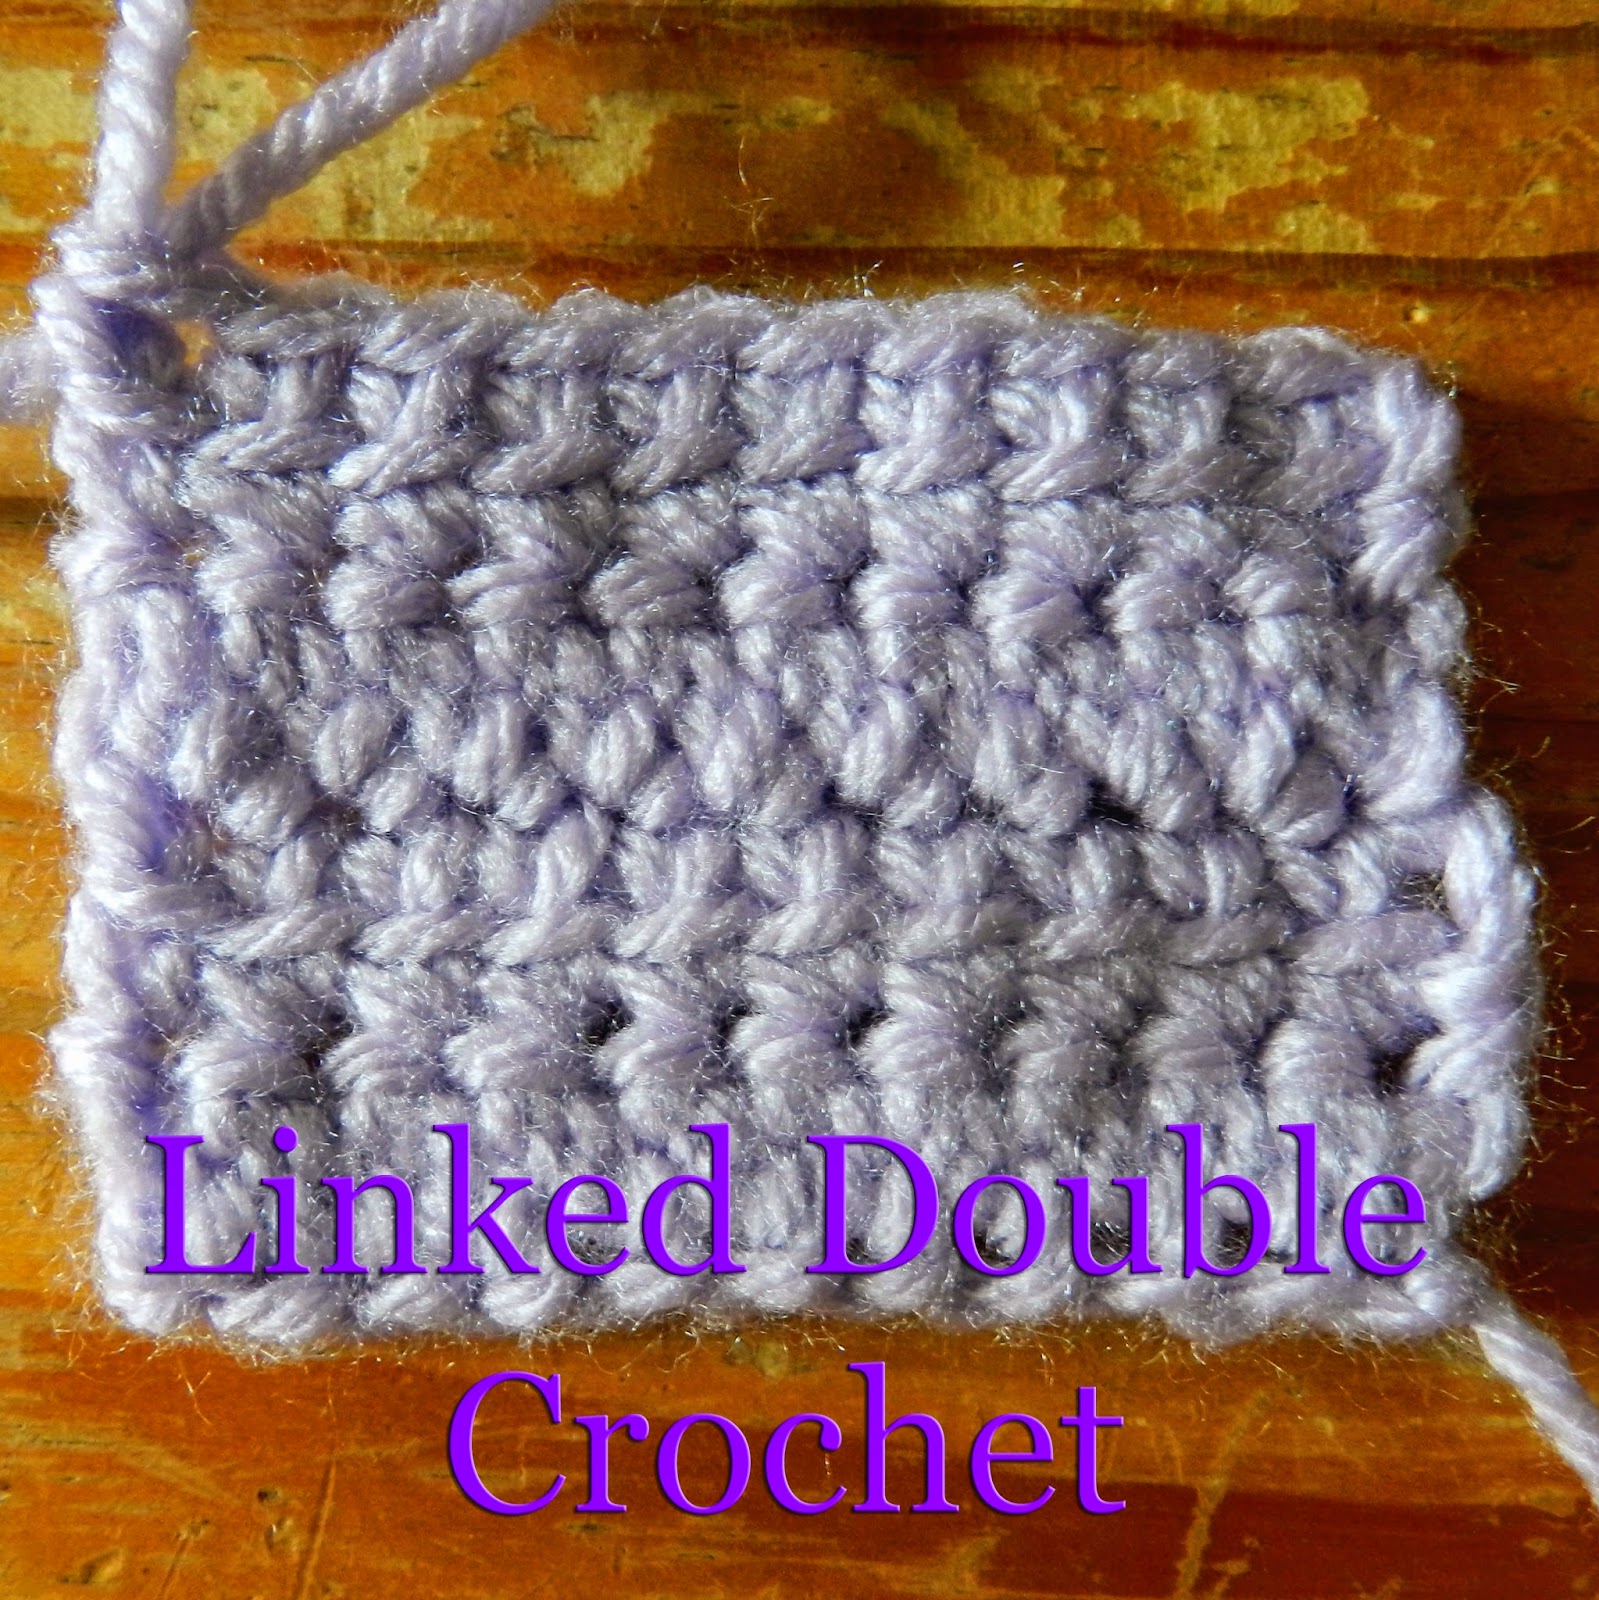 Hooking Housewives: Linked Double Crochet